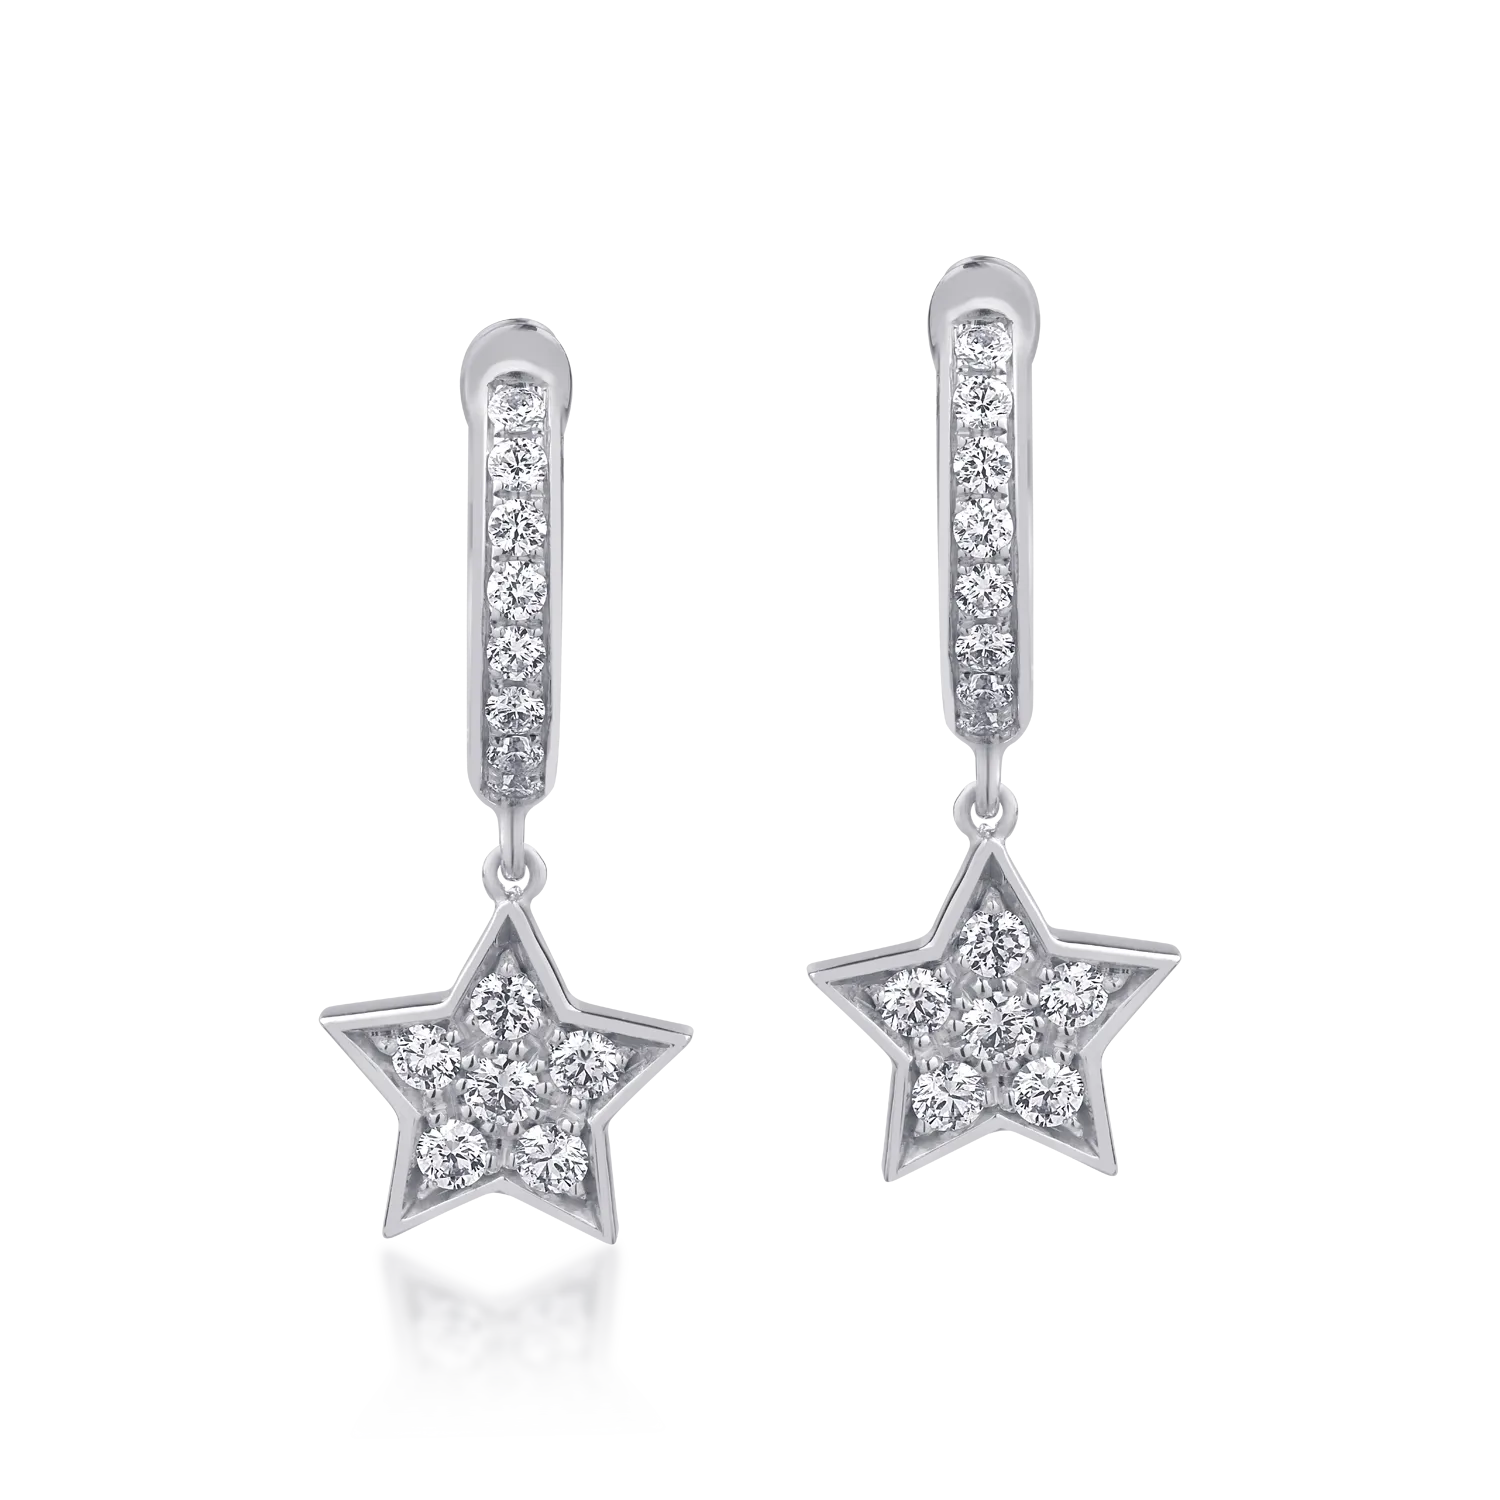 18K white gold earrings with 0.4ct diamonds